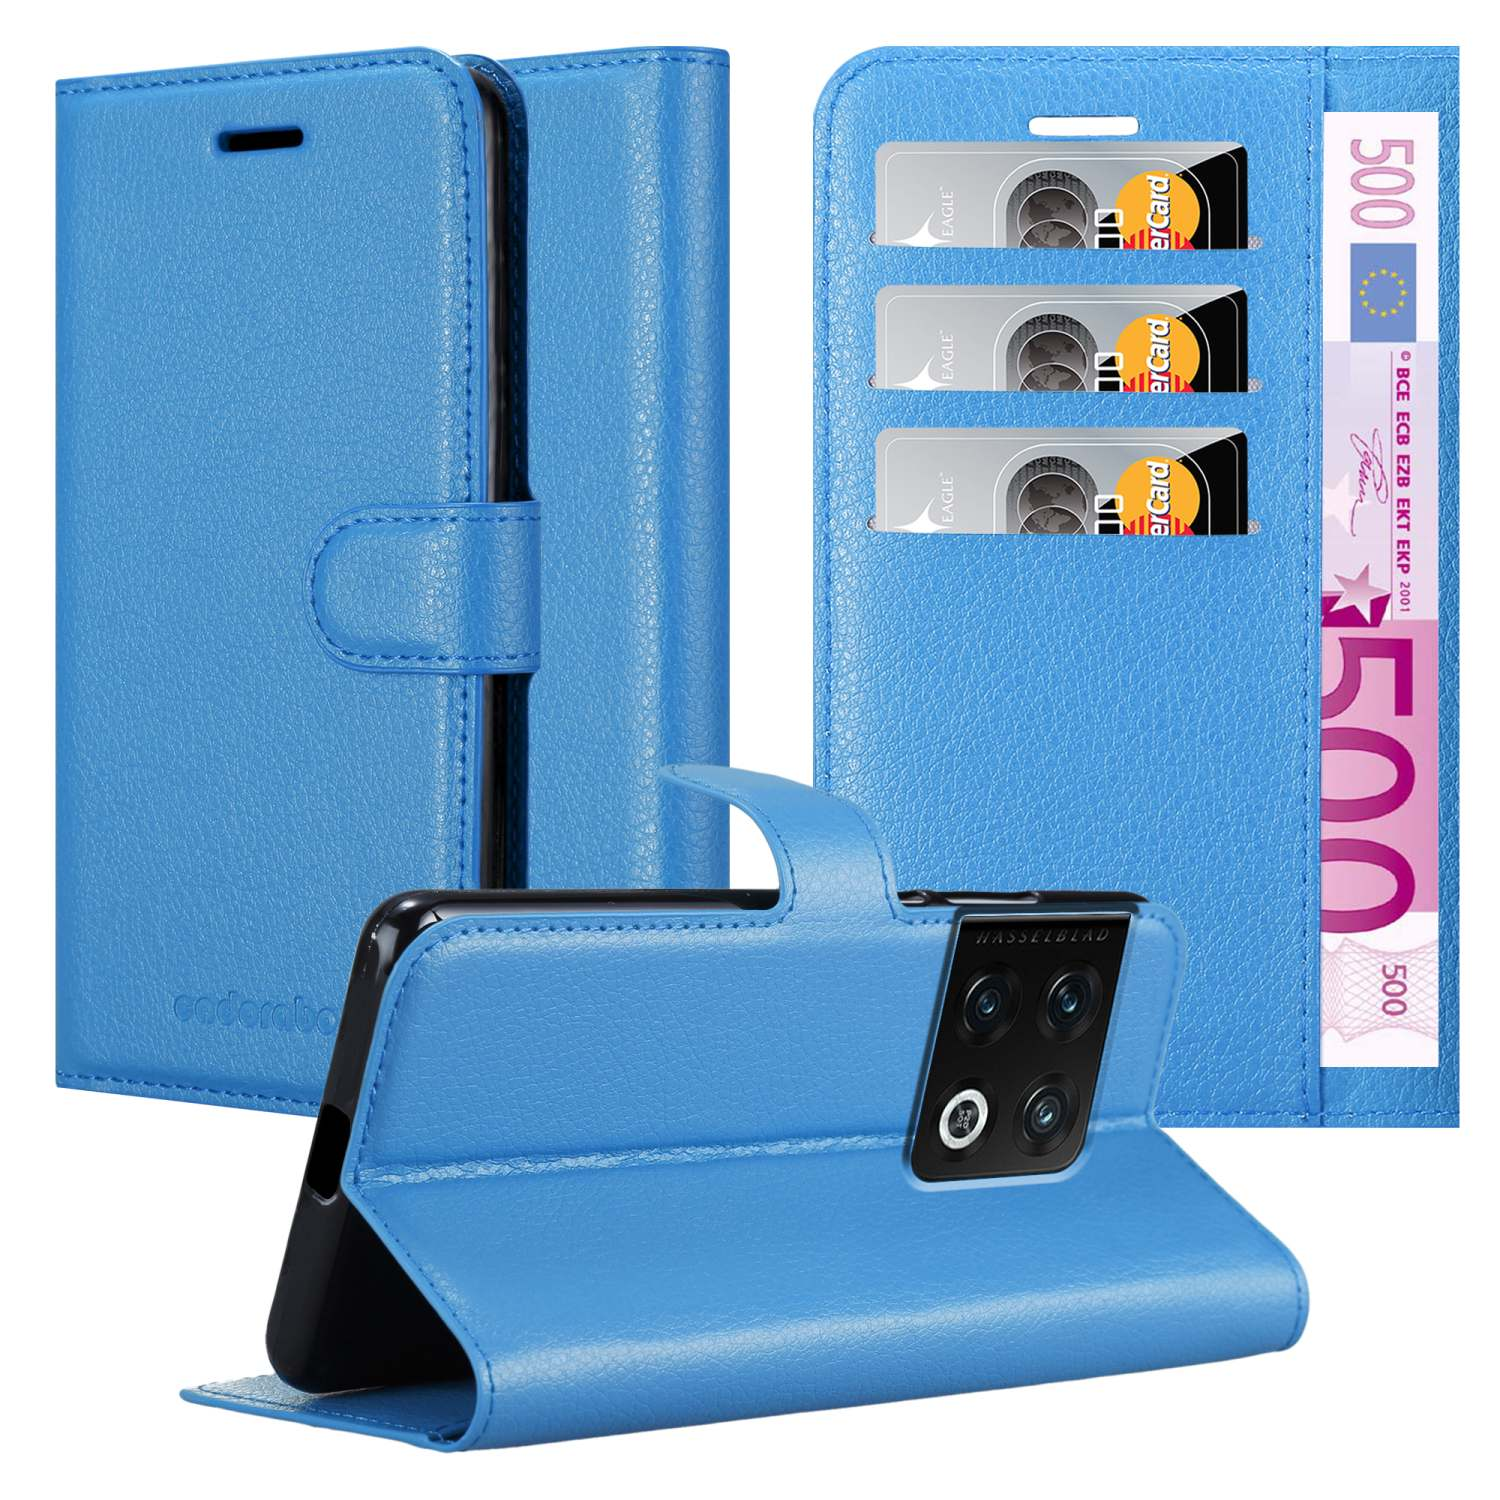 Hülle PASTELL Bookcover, PRO 10 OnePlus, BLAU Book Standfunktion, CADORABO 5G,